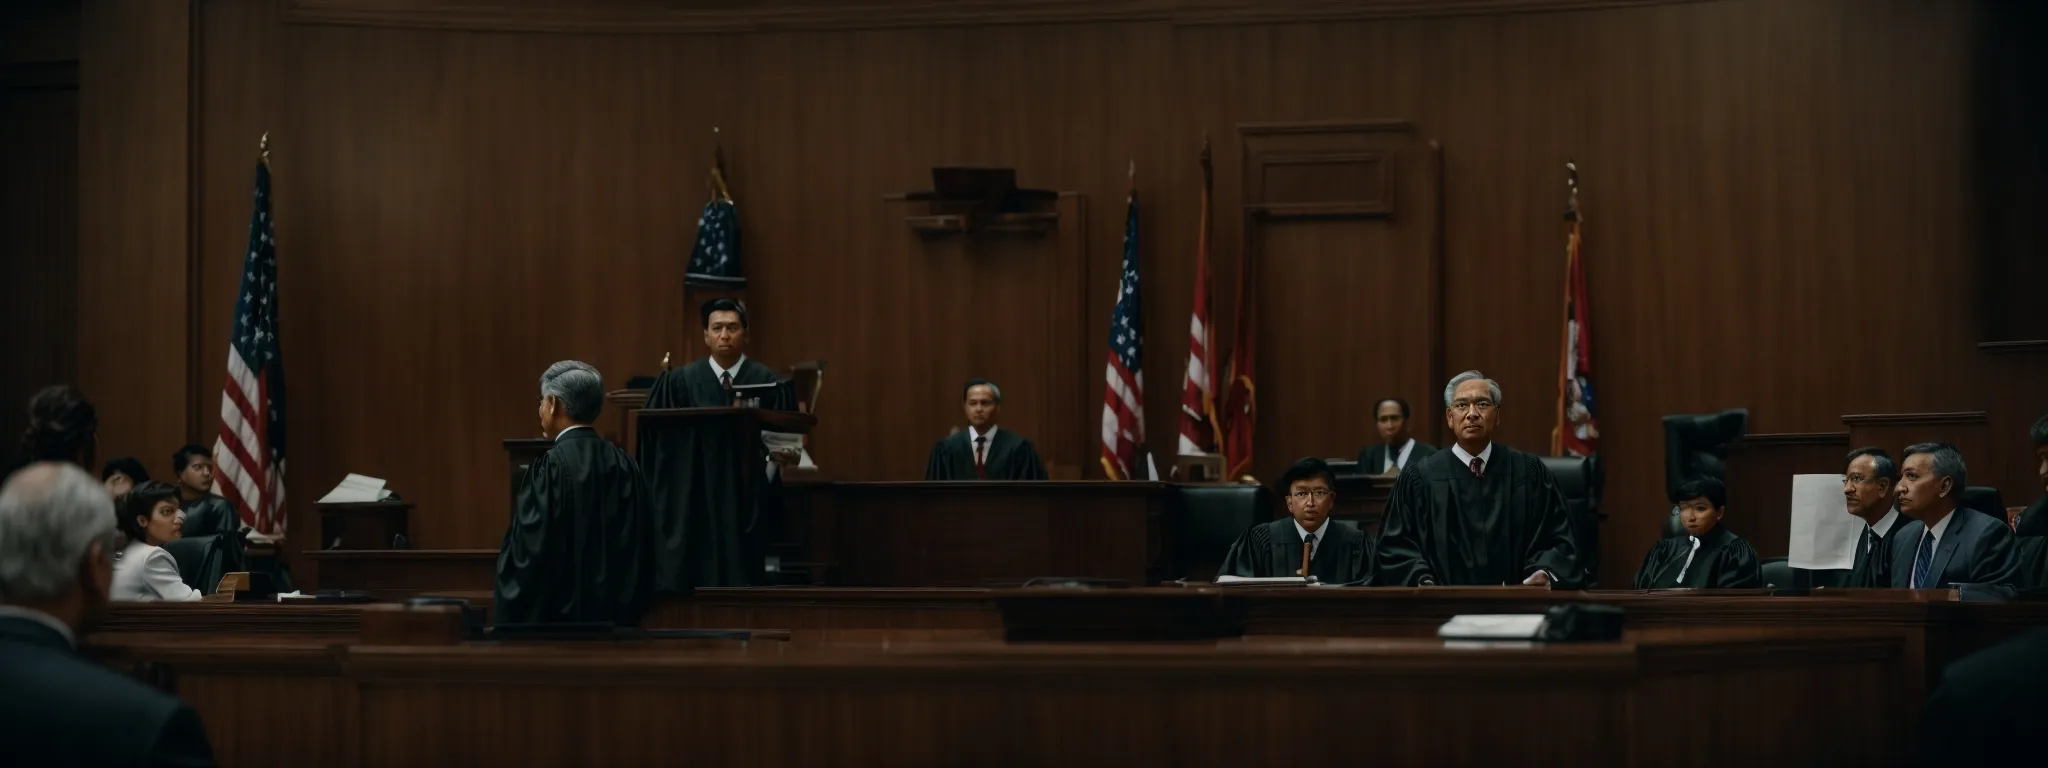 a courtroom with an attorney presenting to a judge without focusing on individual faces or intricate details.